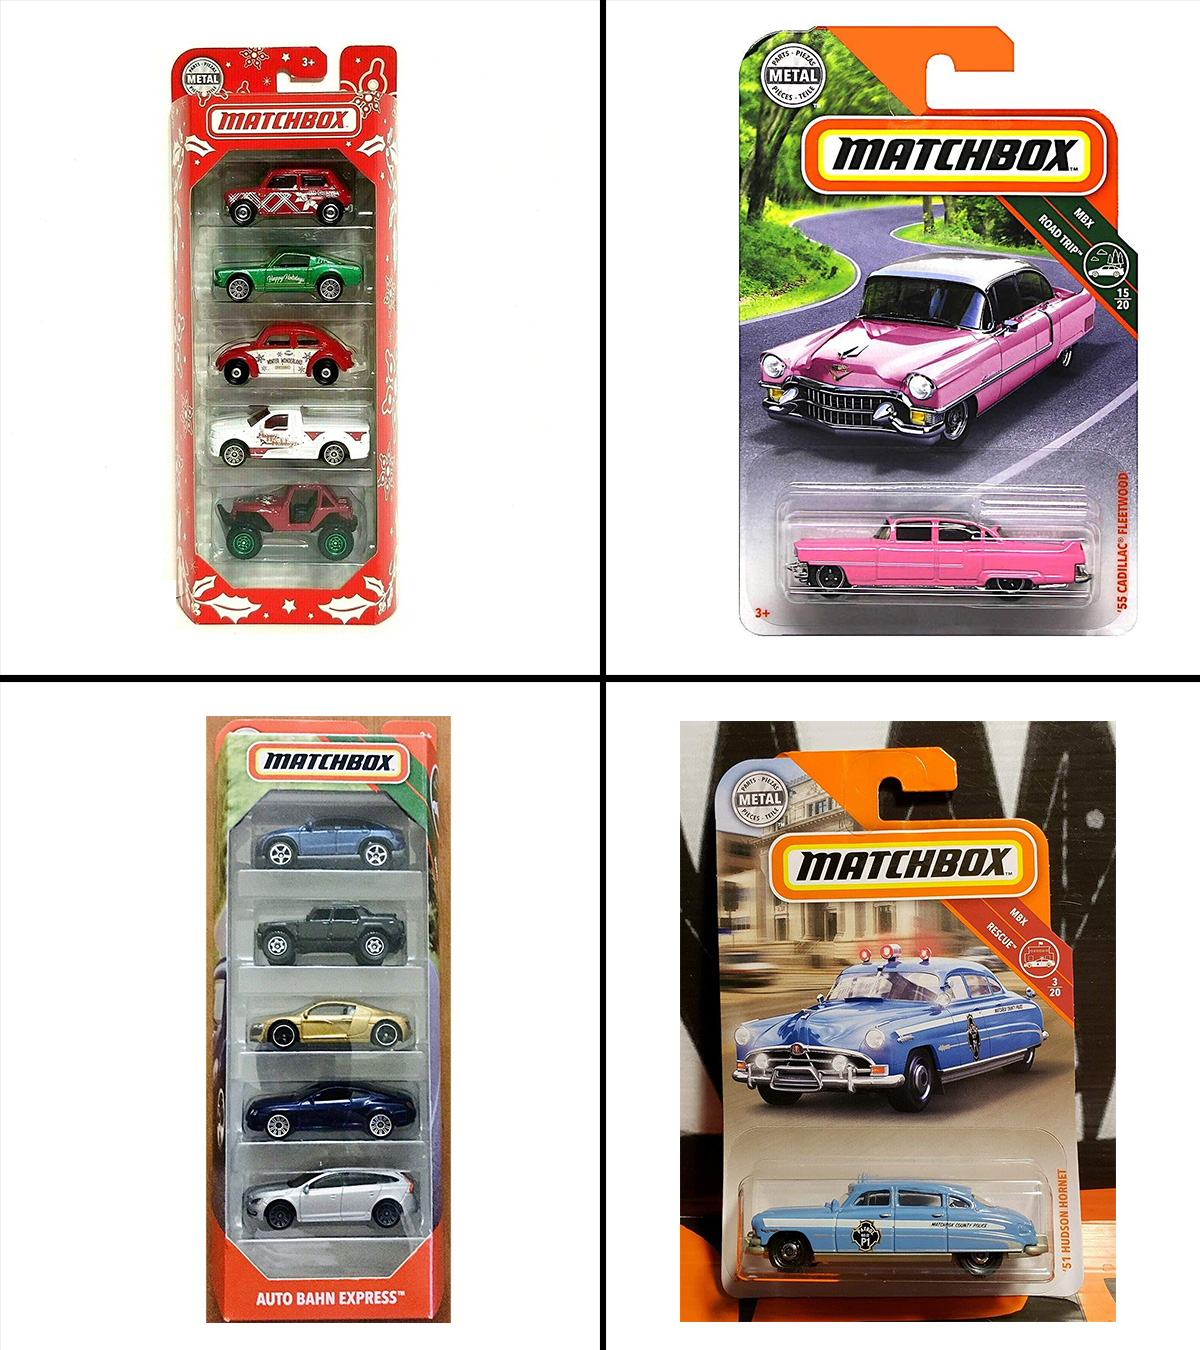 MATCHBOX 5 PACKS 9 PACKS & PLAYSETS CHOOSE FROM LIST 1:64 DIE CAST COLLECTABLE